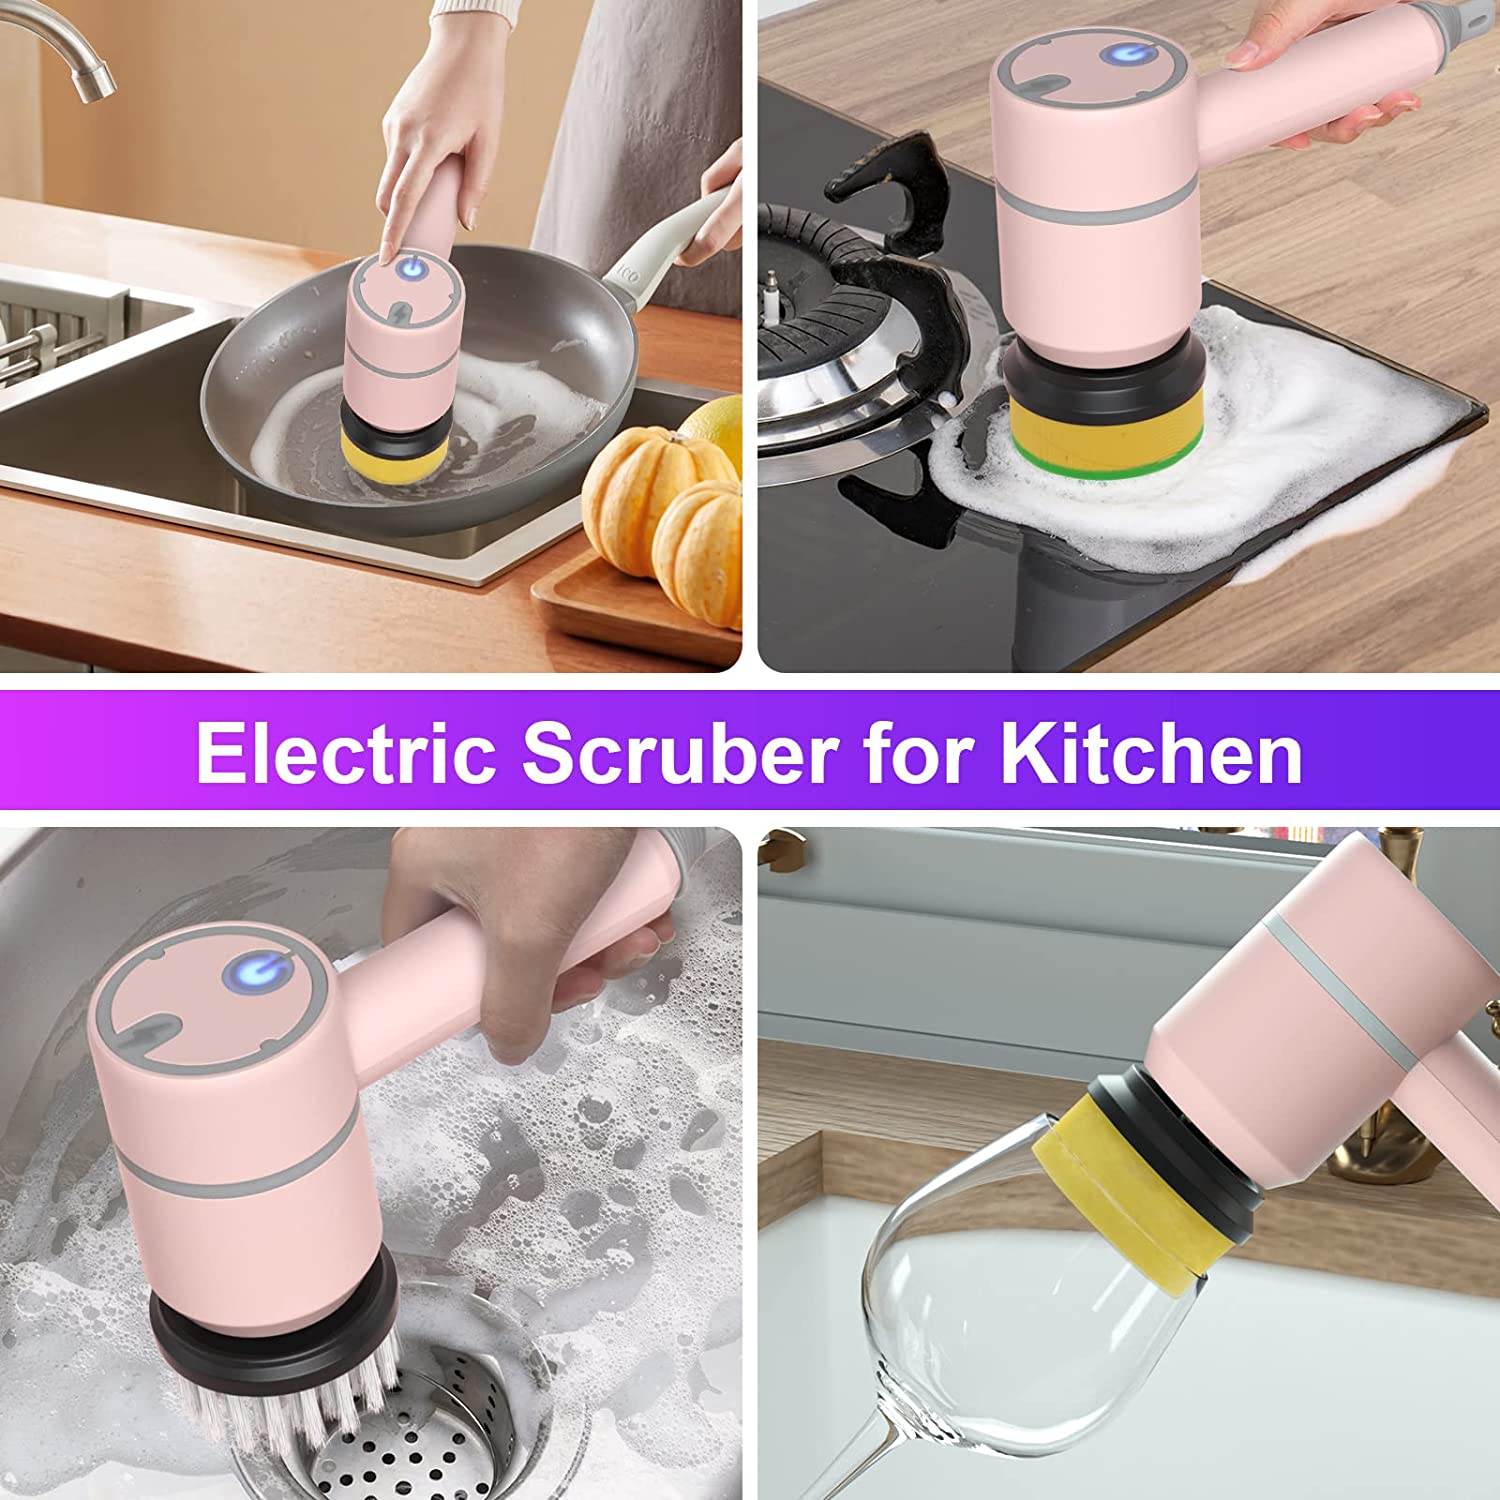 Electric-Spin-Scrubber-Rechargeable-Cleaning-Brush-with-3-Brush-Heads-Portable-Scrubber-Kit-Suitable-for-Bathroom-Wall-Tiles-Floor-Window-Kitchen-20